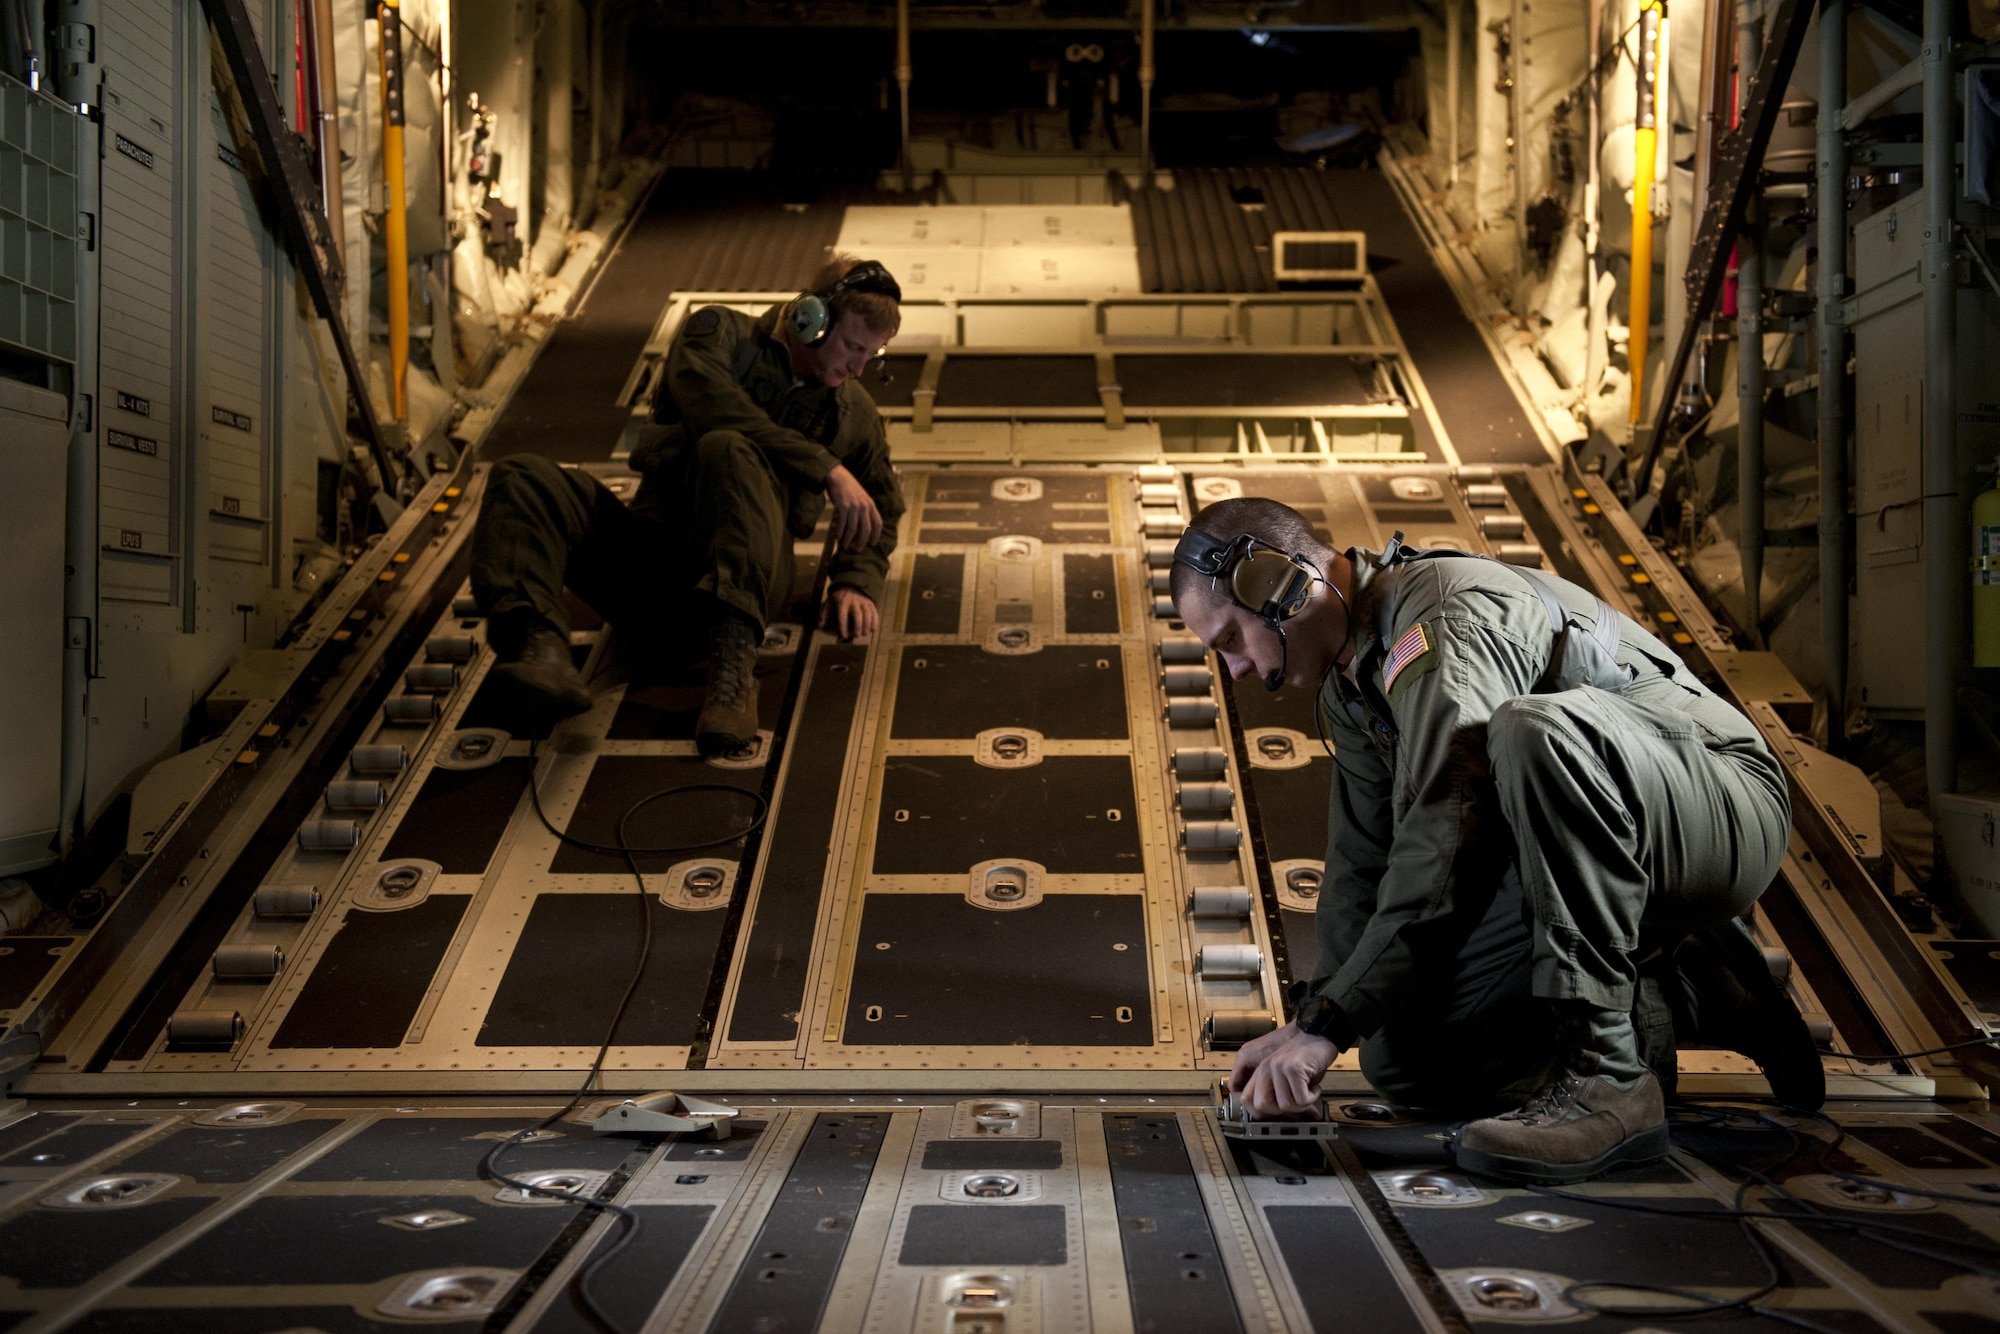 U.S. Air Force Senior Airmen Tim Manzer and Zach Harmon, 17th Special Operations Squadron MC-130J Commando II loadmasters, secure a cargo deck during a training exercise Feb. 17, 2016, off the coast of Okinawa, Japan. Manzer and Harmon participated in a 17th SOS simulation that tested the unit's ability to safely conduct a quick-reaction, full-force sortie involving a five-ship formation flight, cargo drops, short runway landings and takeoffs, and helicopter air-to-air refueling. (U.S. Air Force photo by Senior Airman Peter Reft/Released)